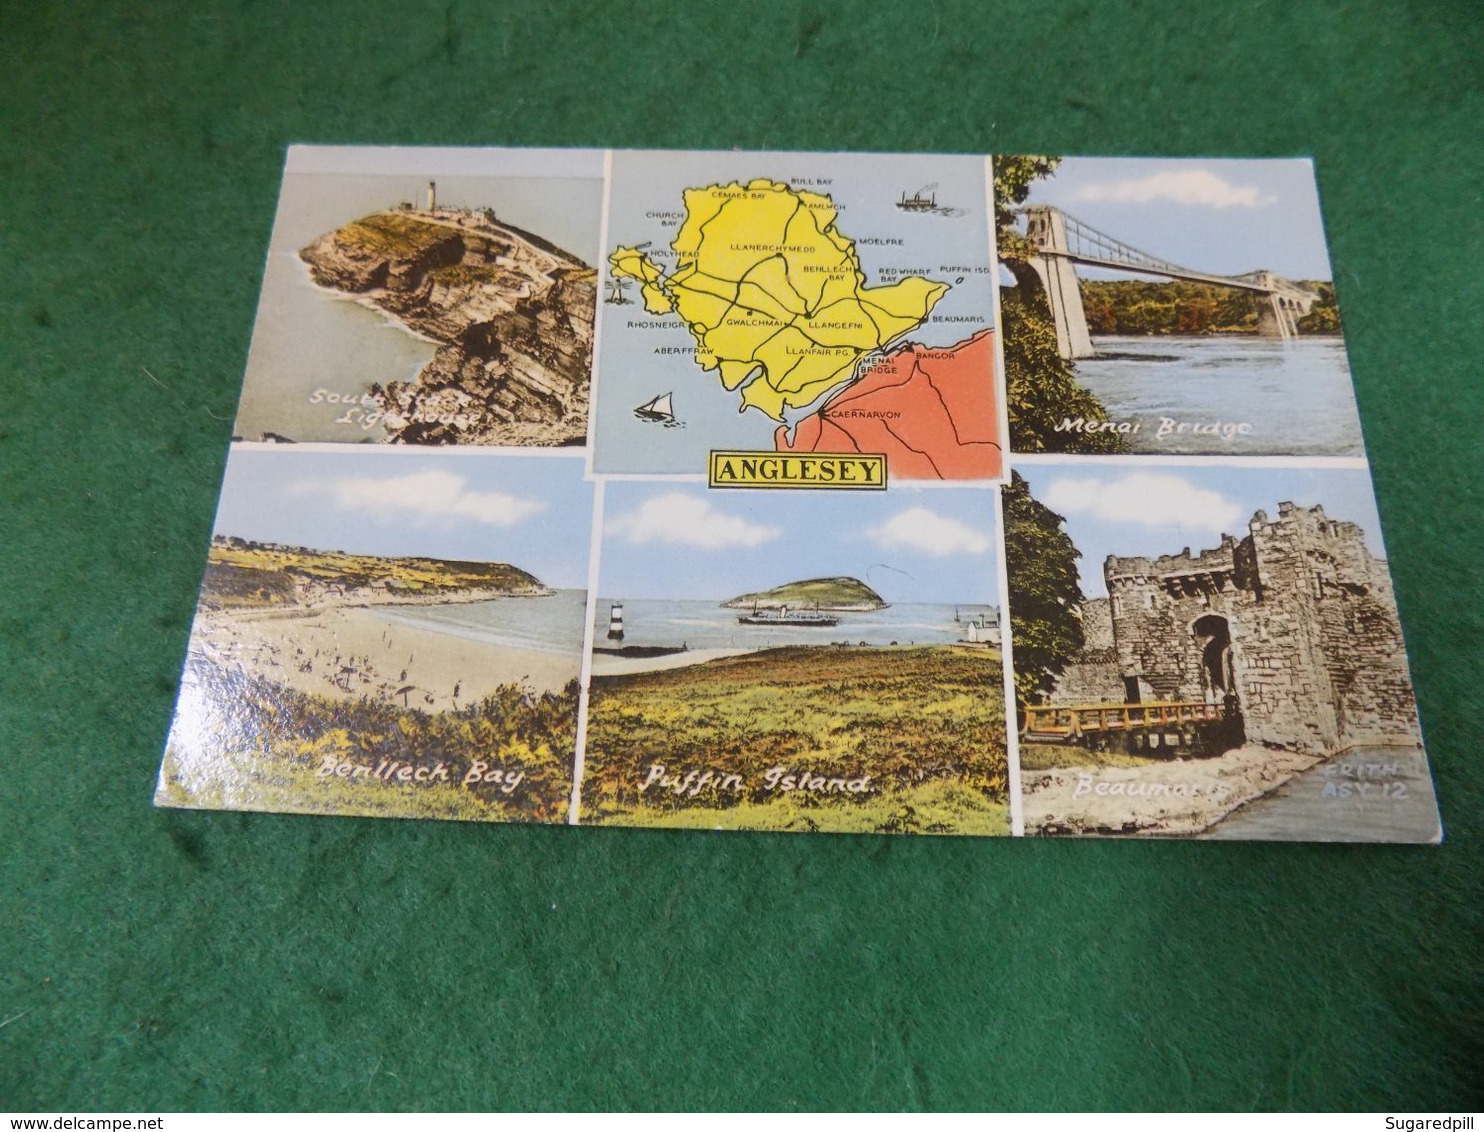 VINTAGE UK WALES: ANGLESEY Multiview Tint Frith - Anglesey